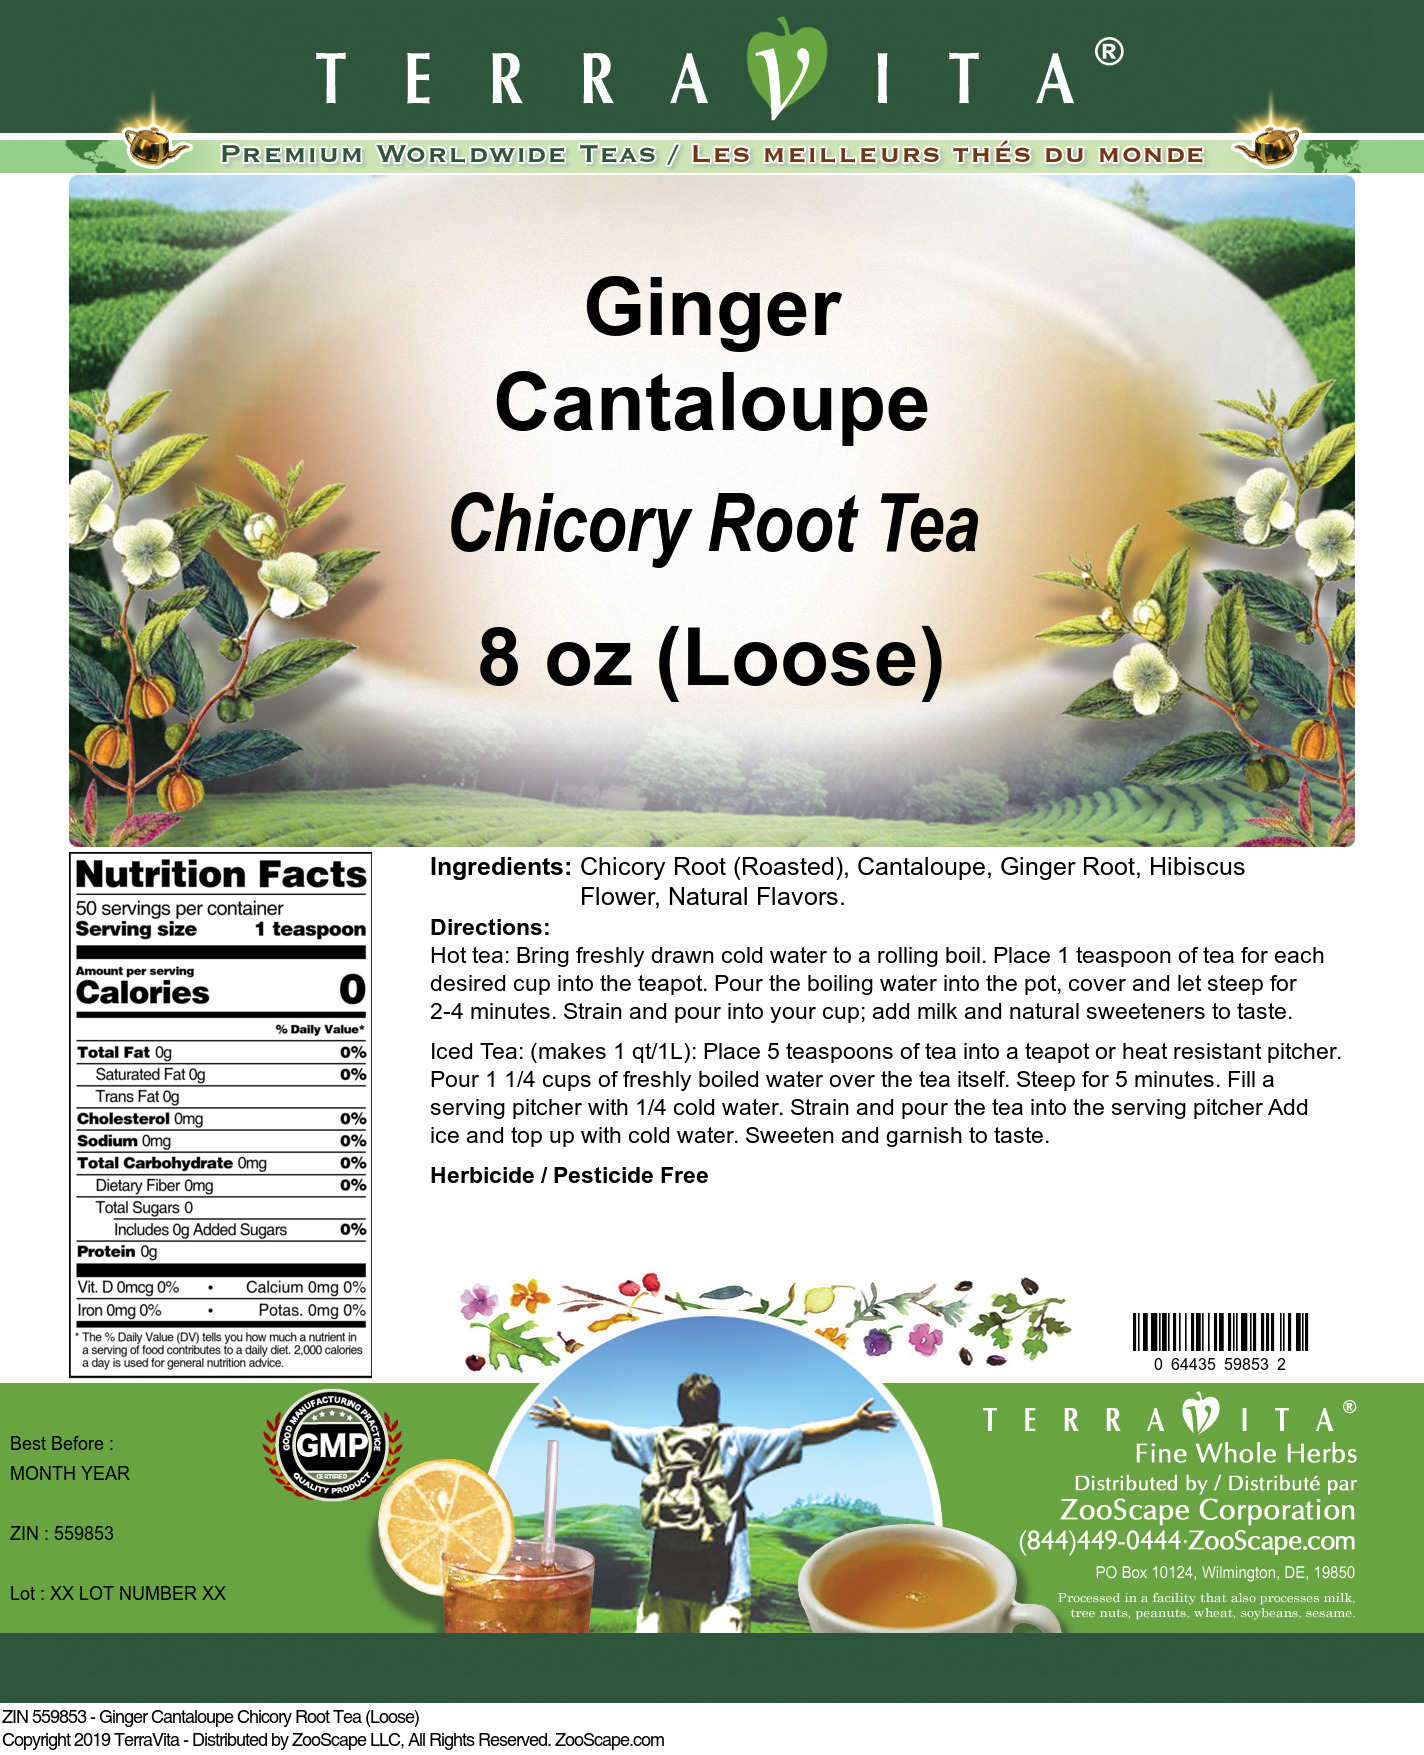 Ginger Cantaloupe Chicory Root Tea (Loose) - Label